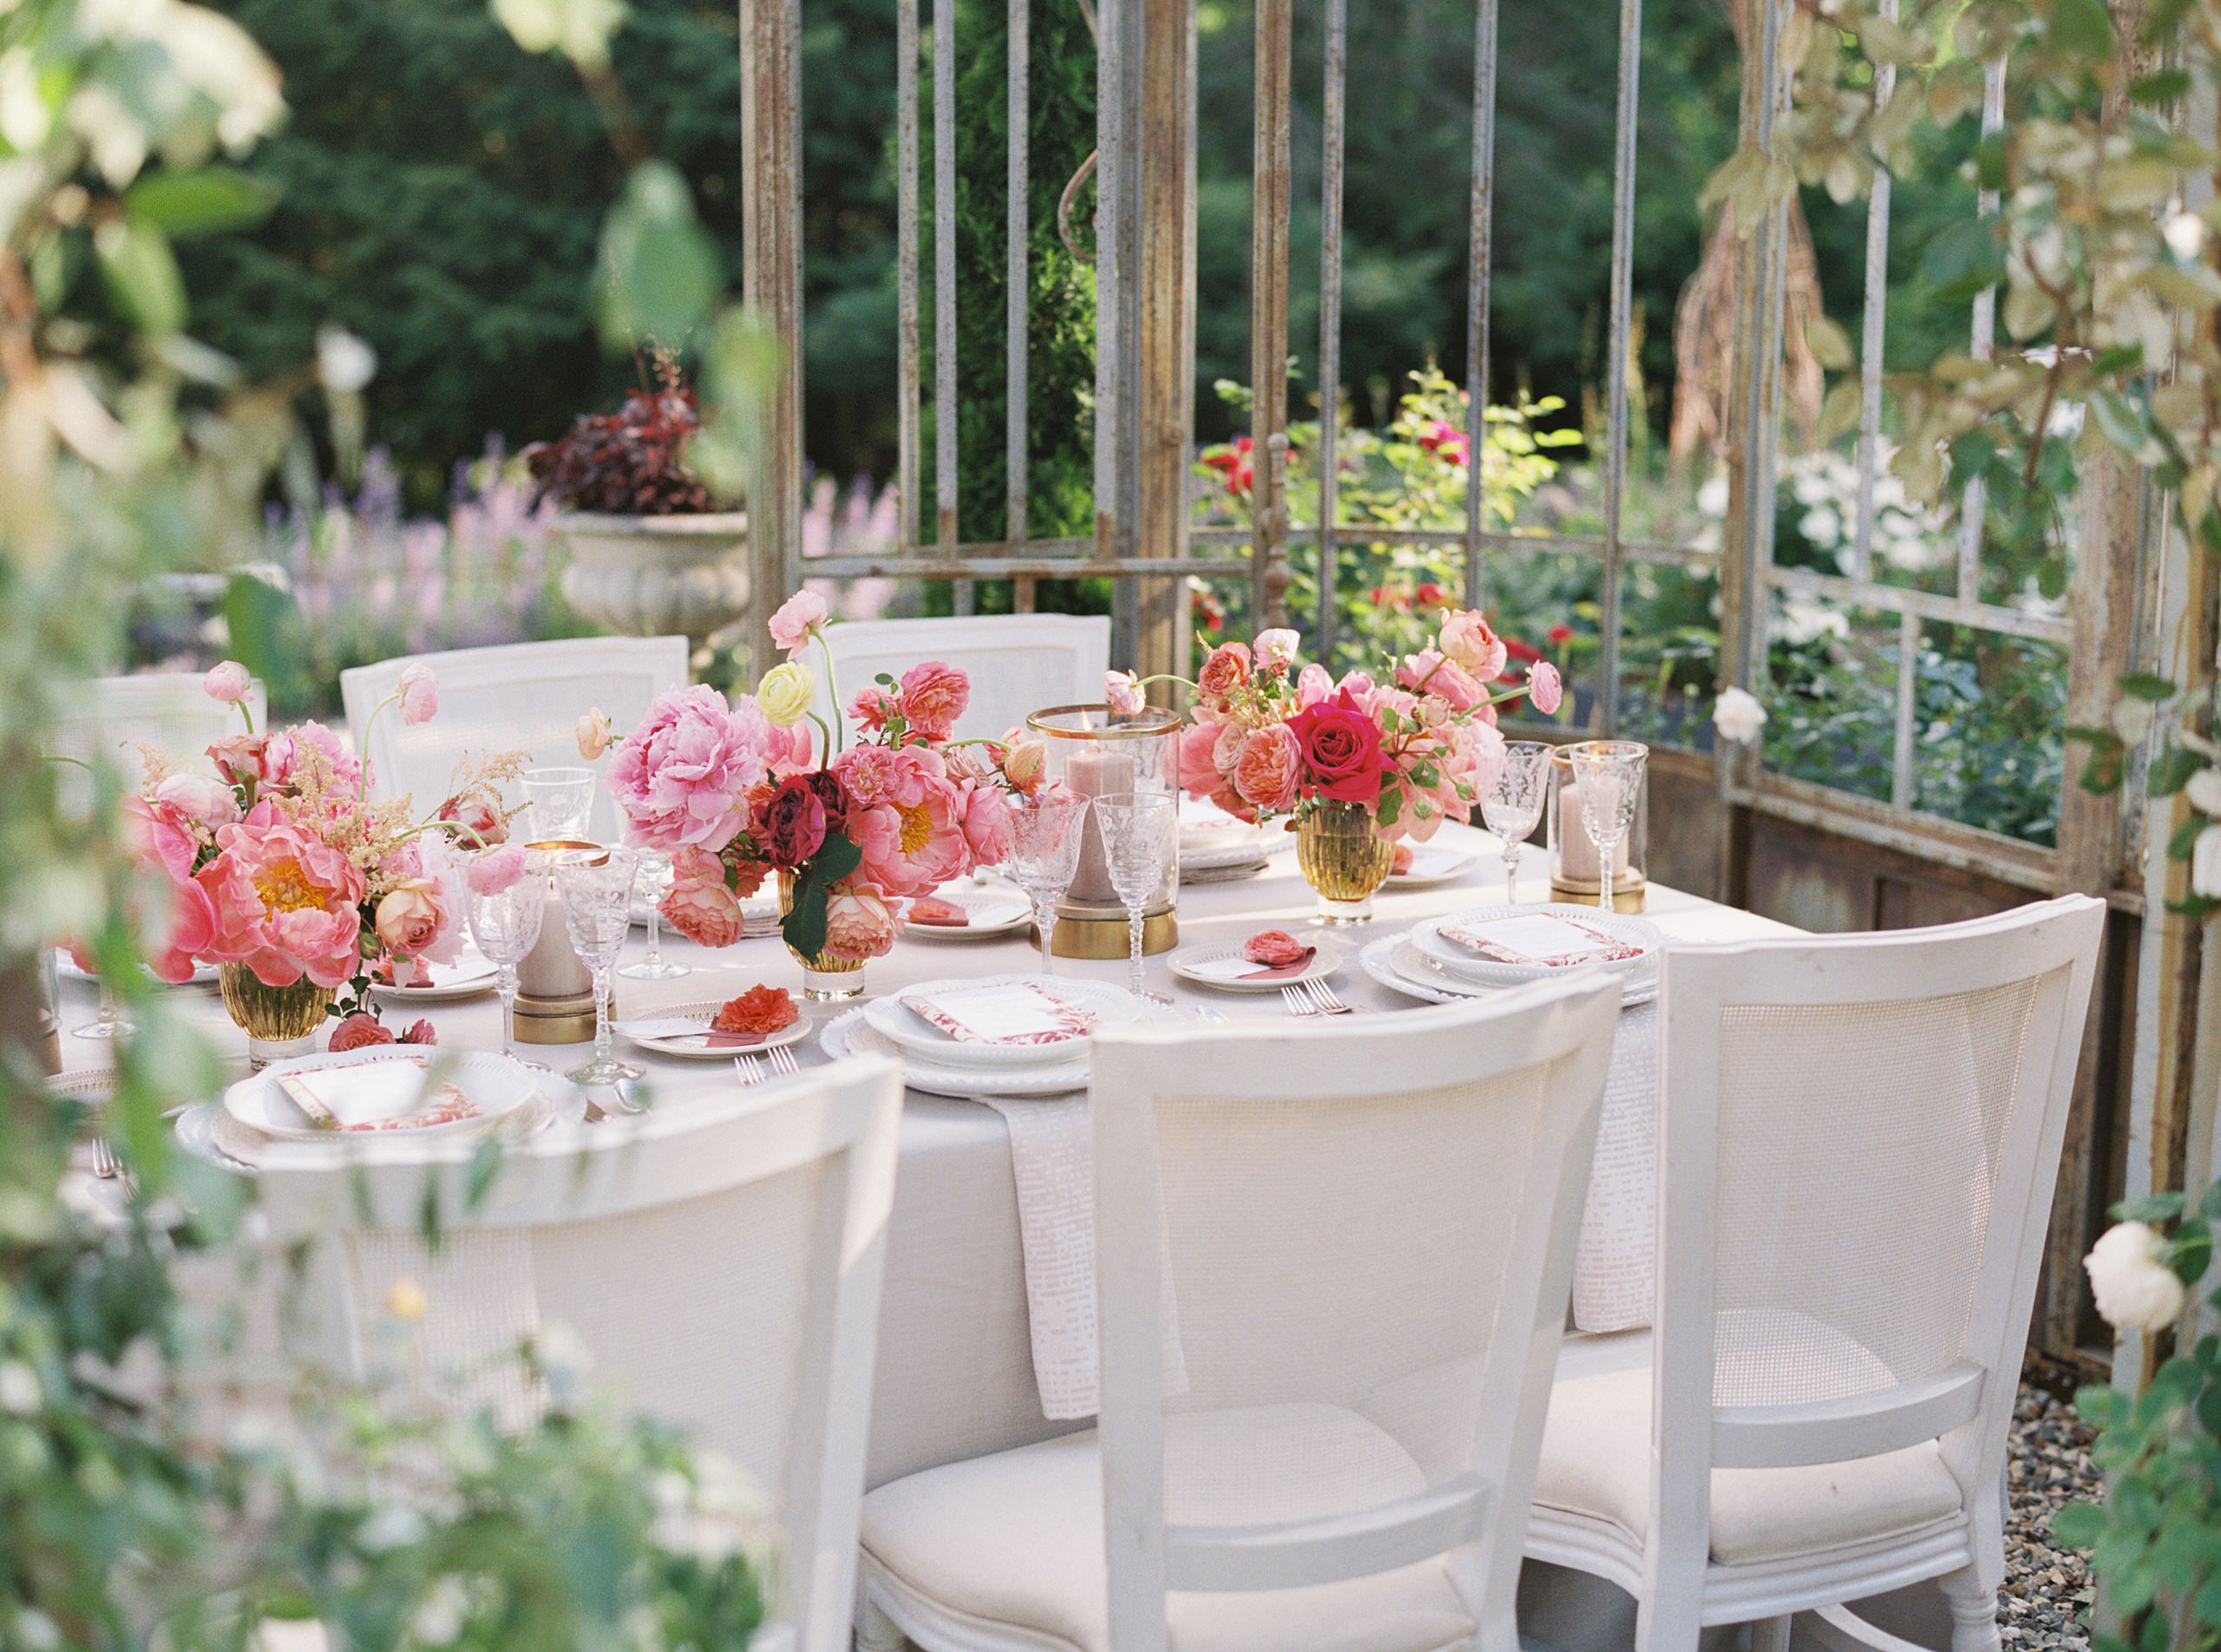 Bright and Bold Spring Wedding at Greencrest Manor. Beautiful outdoor tablescape for wedding with pink garden roses. Photographed on film by Chicago based destination wedding photographer Sarah Sunstrom Photography.